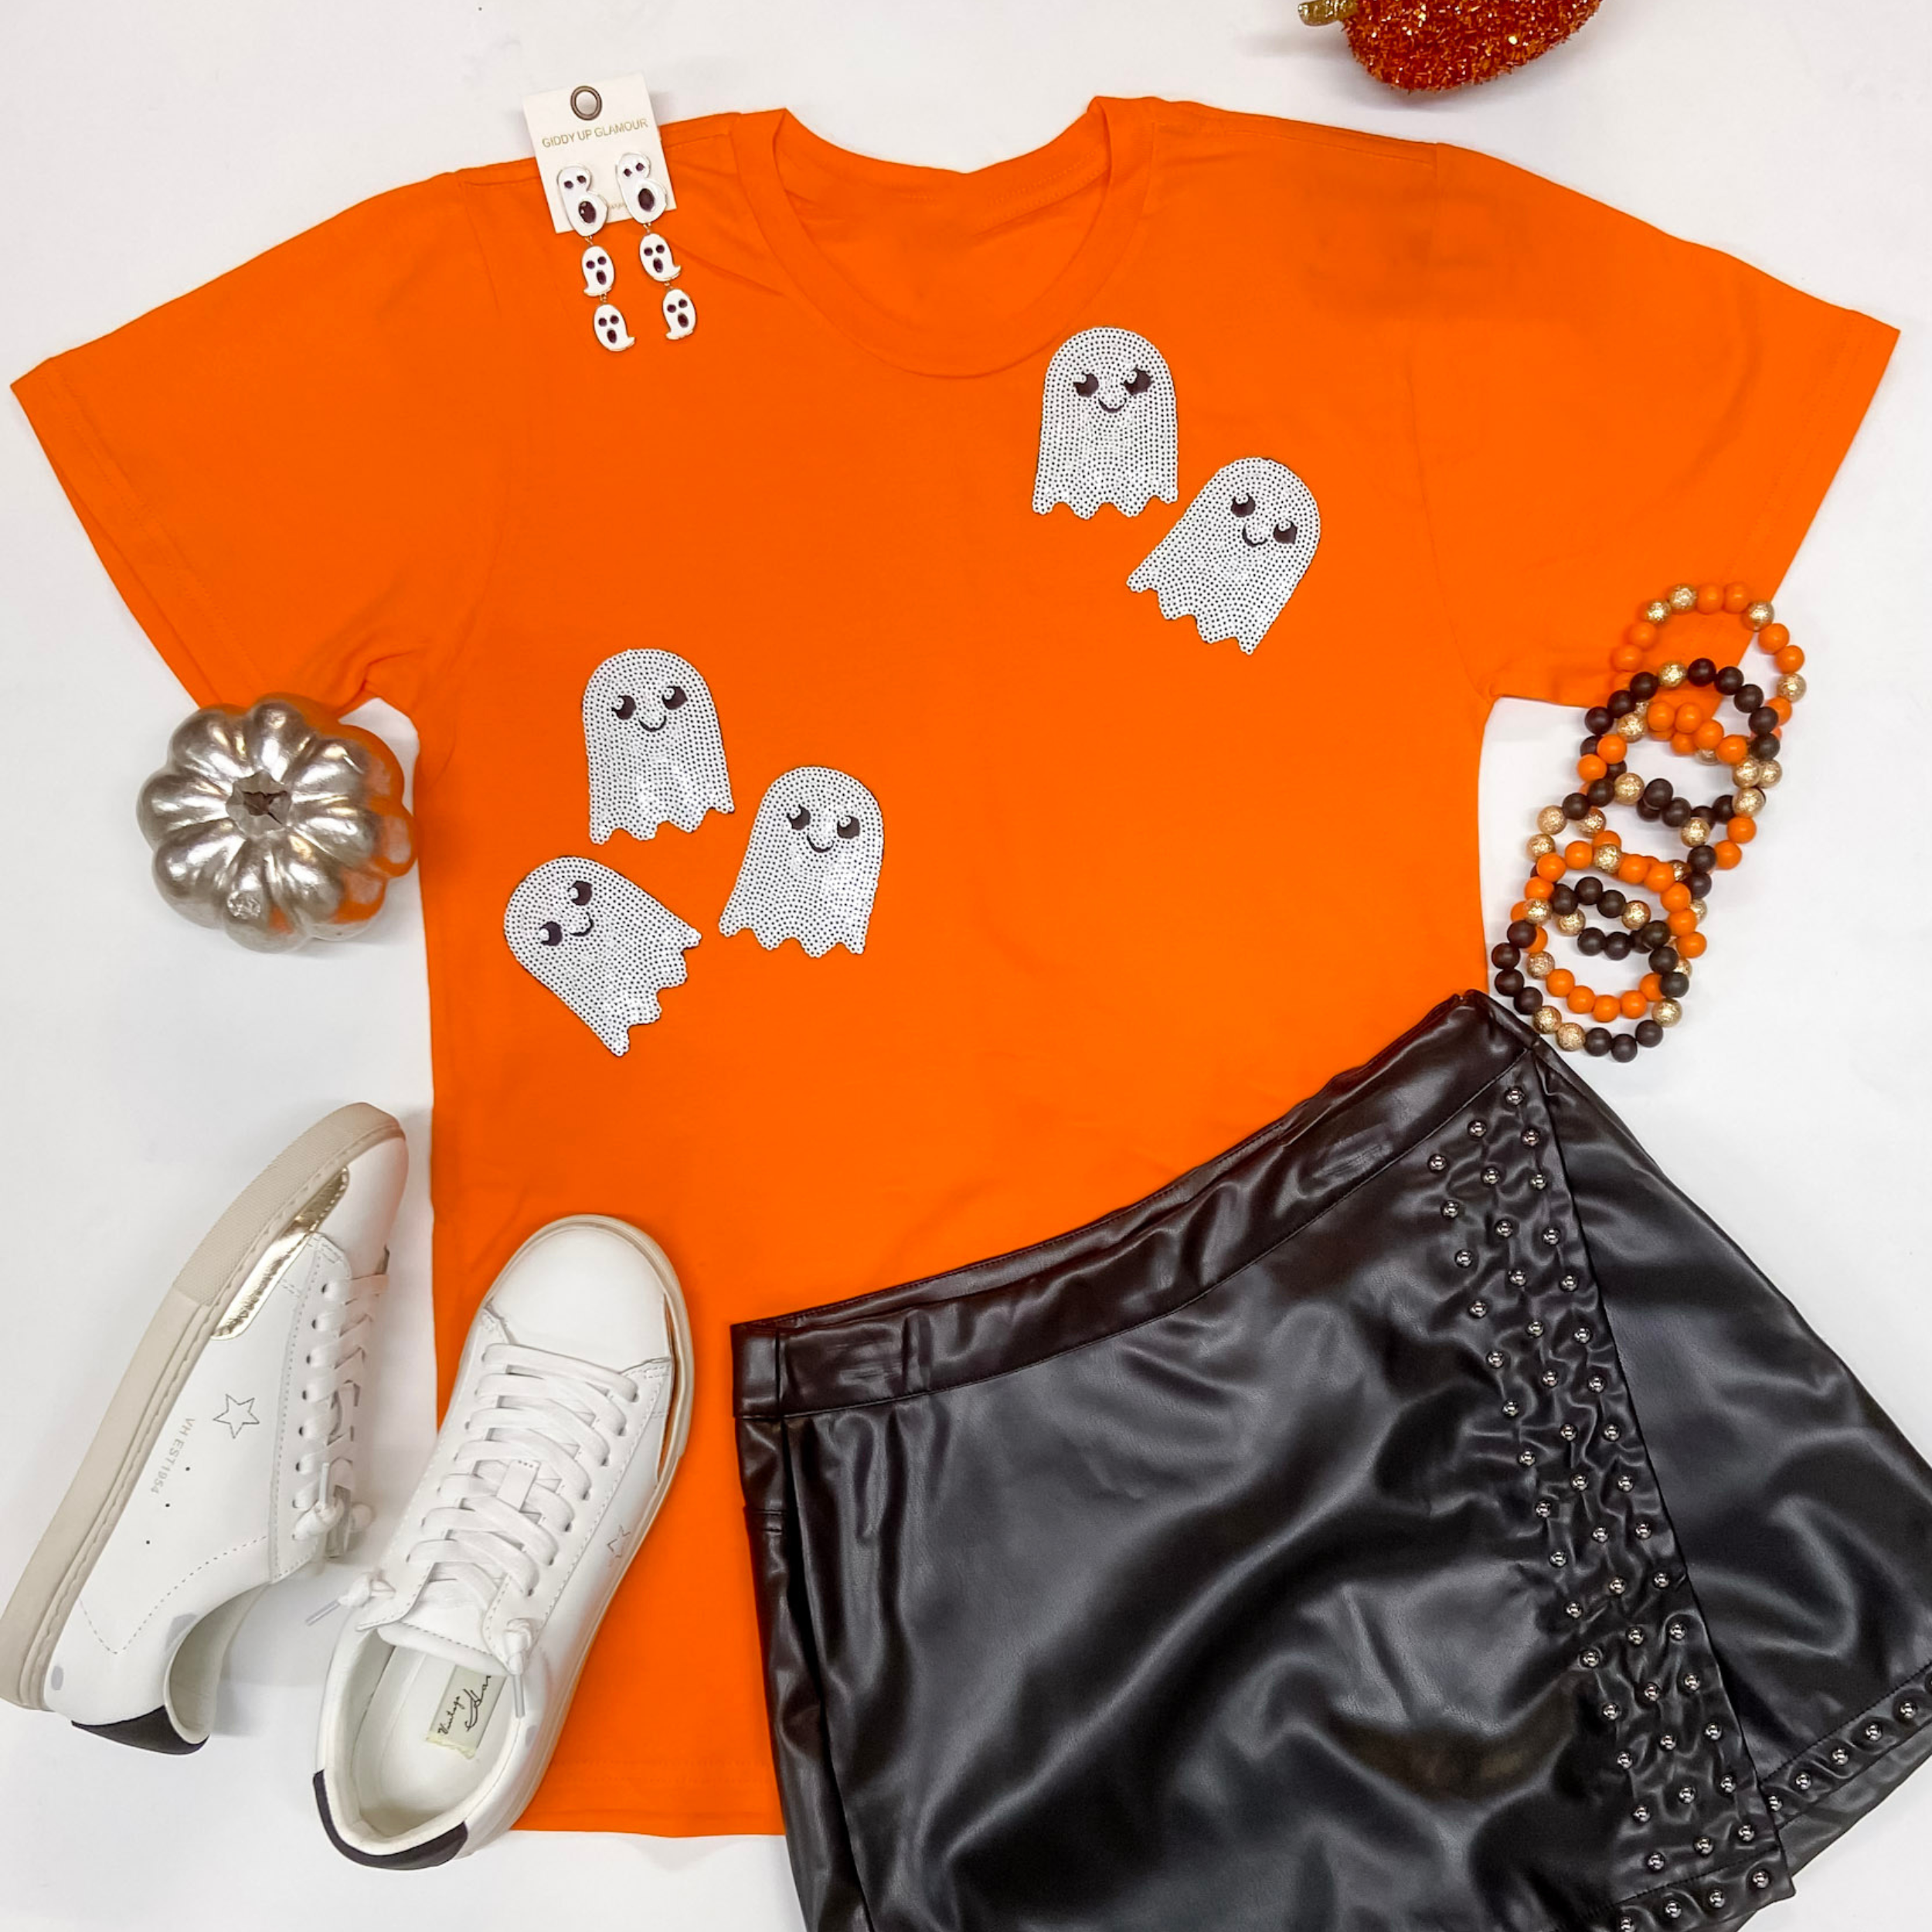 An orange short sleeve tee shirt with sequin ghosts pictured on a white background. This tee is pictured with white sneakers, a leather skort, and halloween jewelry.